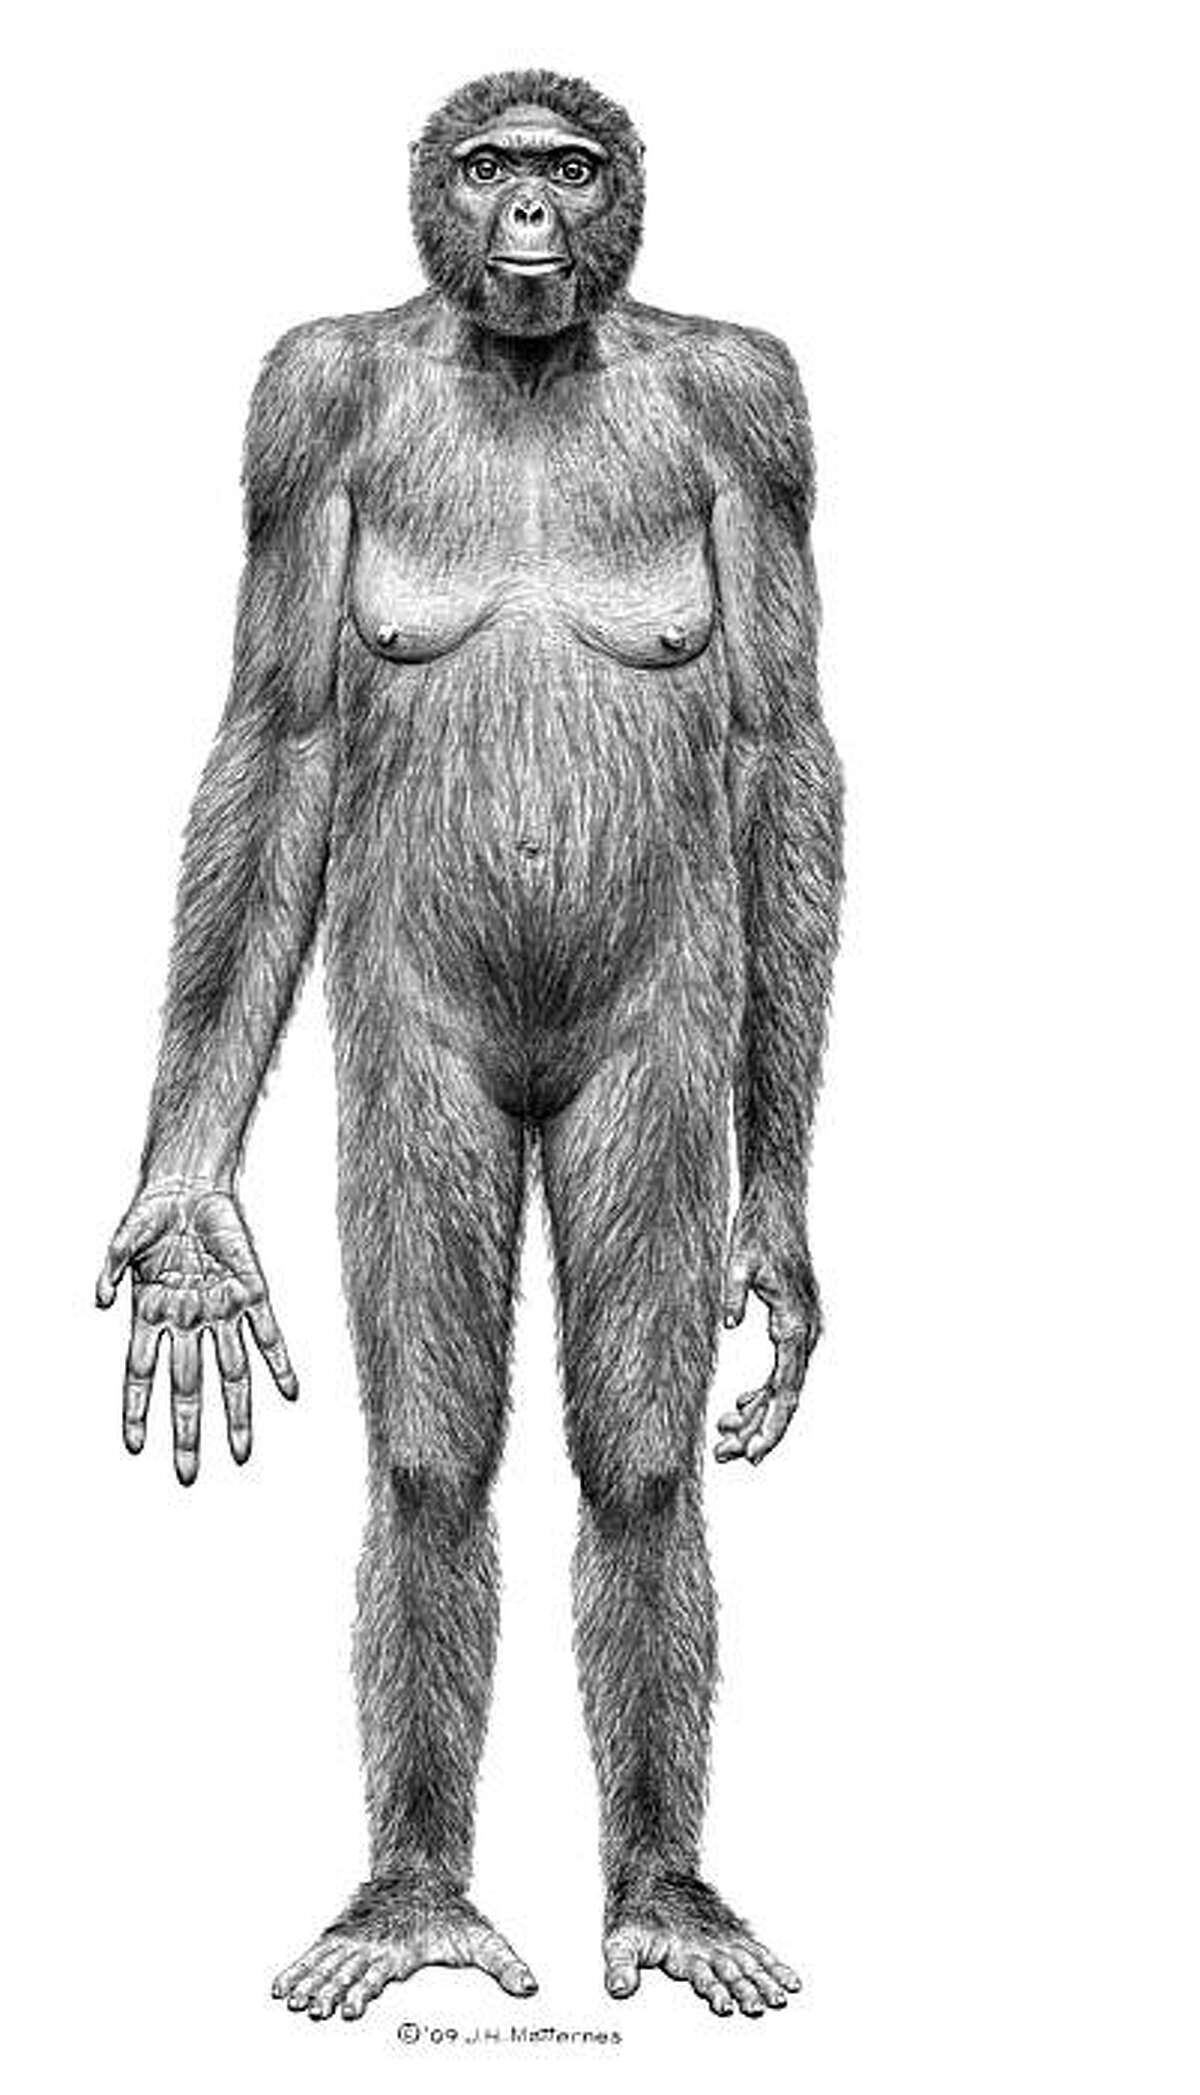 This image released October 1, 2009 by "Science" shows the probable life appearance in anterior view of Ardipithecuss ramidus("Ardi"). In a special issue of Science, an international team of scientists has for the first time thoroughly described Ardipithecus ramidus, a hominid species that lived 4.4 million years ago in what is now Ethiopia. This research, in the form of 11 detailed papers and more general summaries, will appear in the journal’s October 2, 2009 issue. AFP PHOTO/HO/SCIENCE/J.H. Mattemes = RESTRICTED TO EDITORIAL USE = No ARCHIVES = (Photo credit should read HO/AFP/Getty Images)